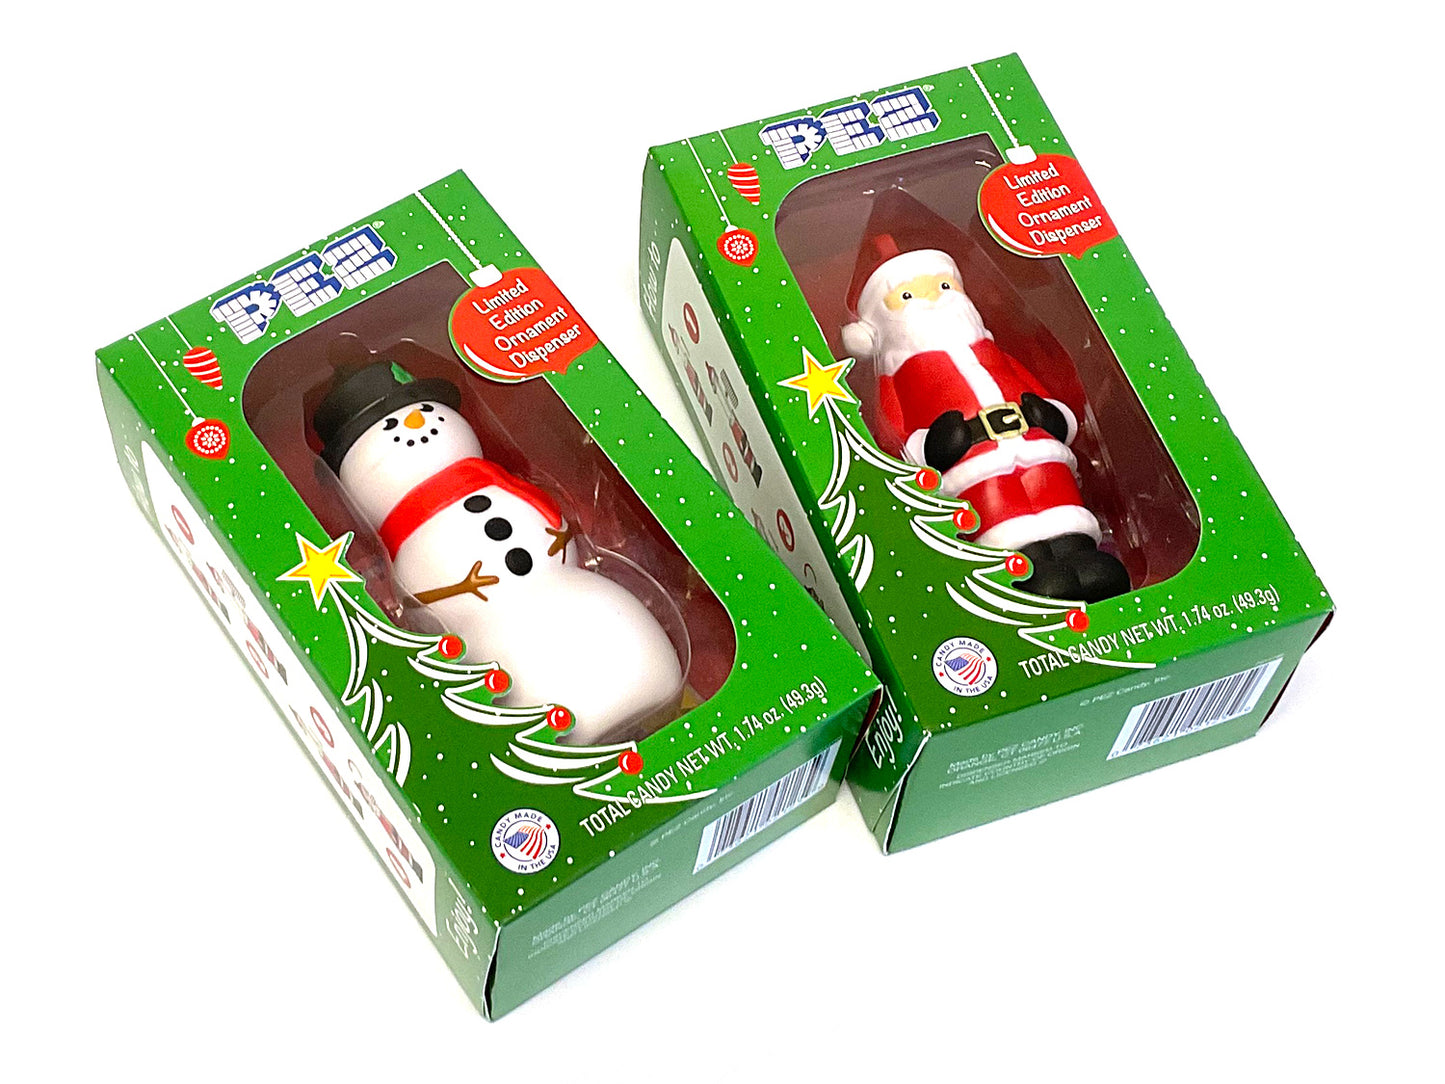 PEZ Limited Edition Christmas Ornament